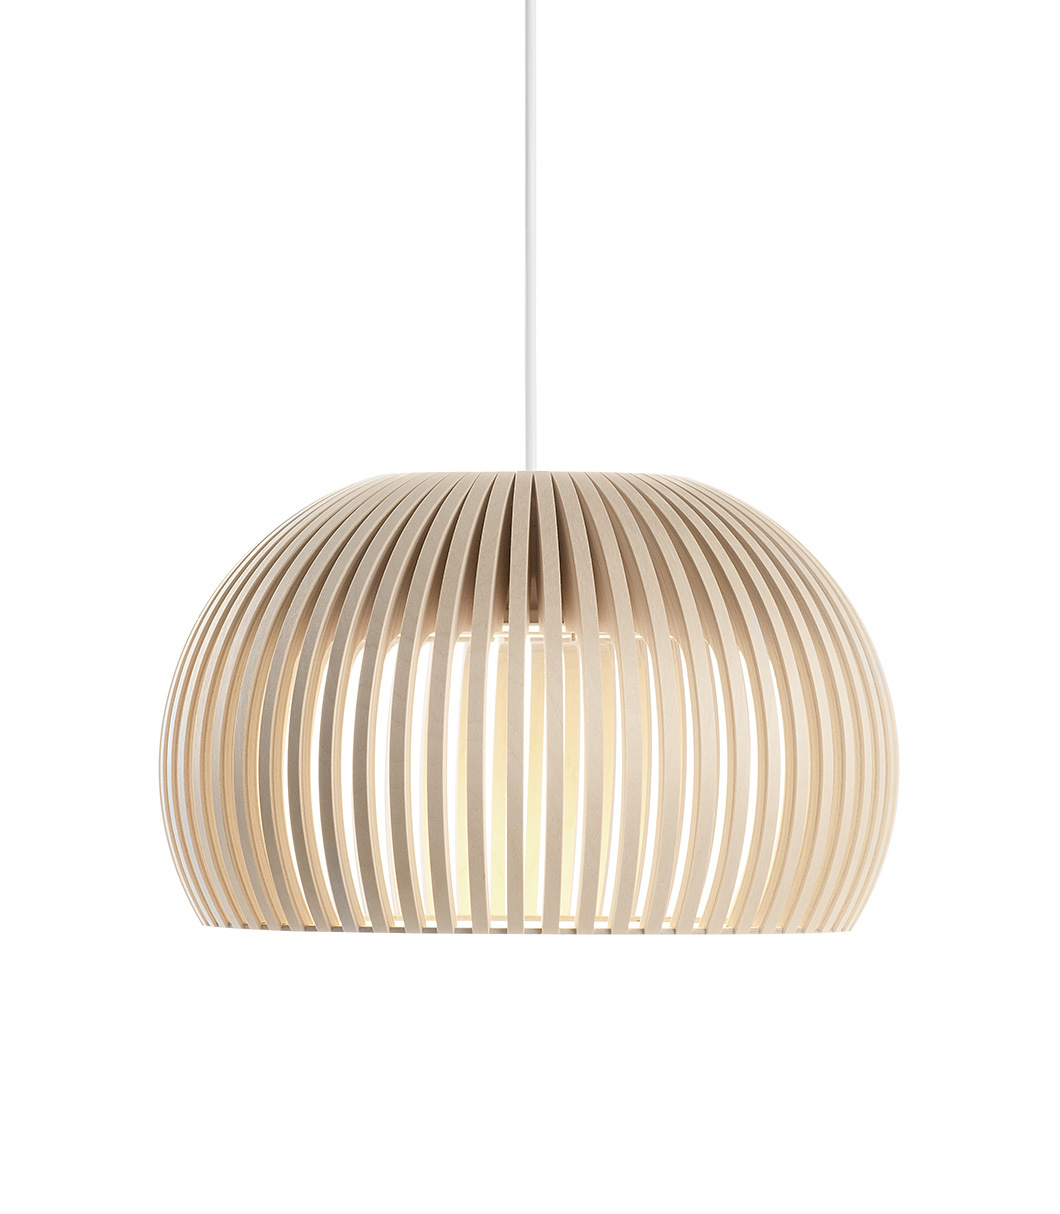 Atto 5000 pendant lamp is available in natural birch